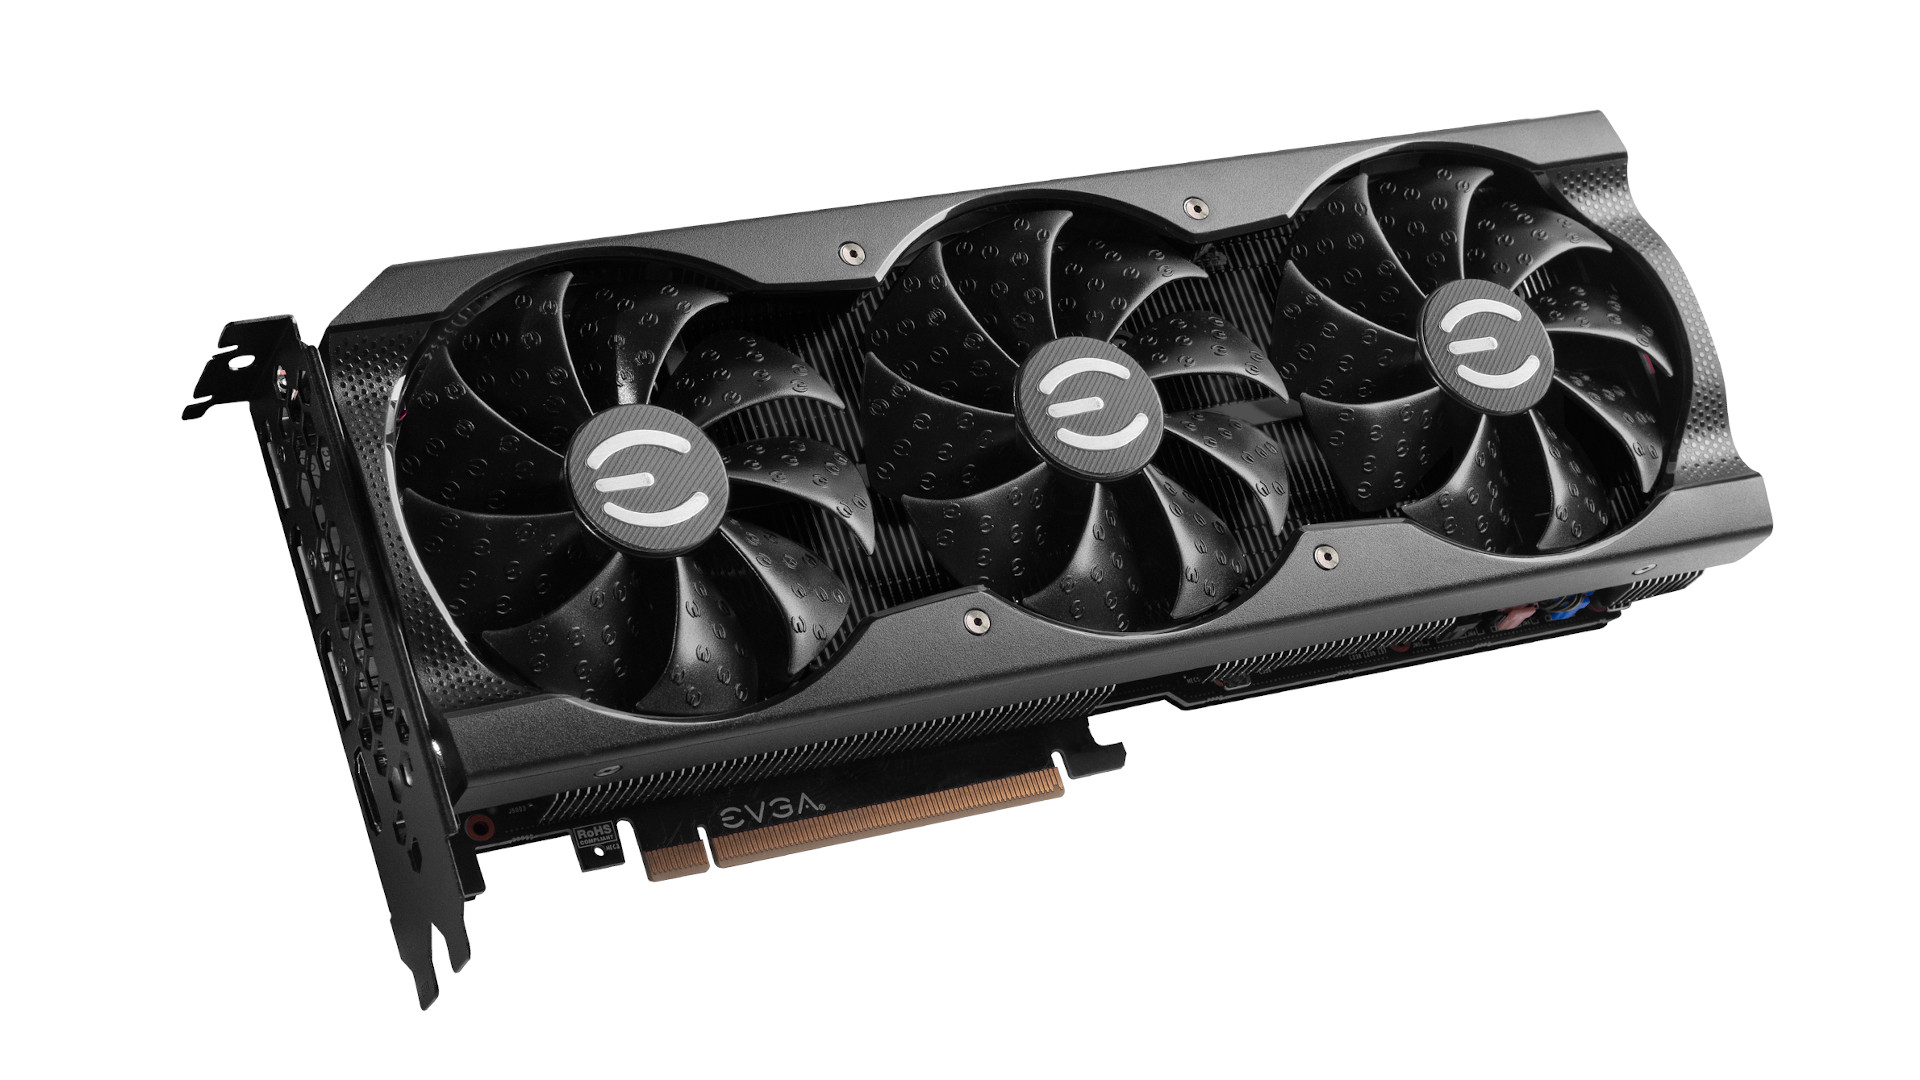 Nvidia Rtx 3080 Ti Gpus May Be Even Harder To Buy After Firmware Fix Helps Miners